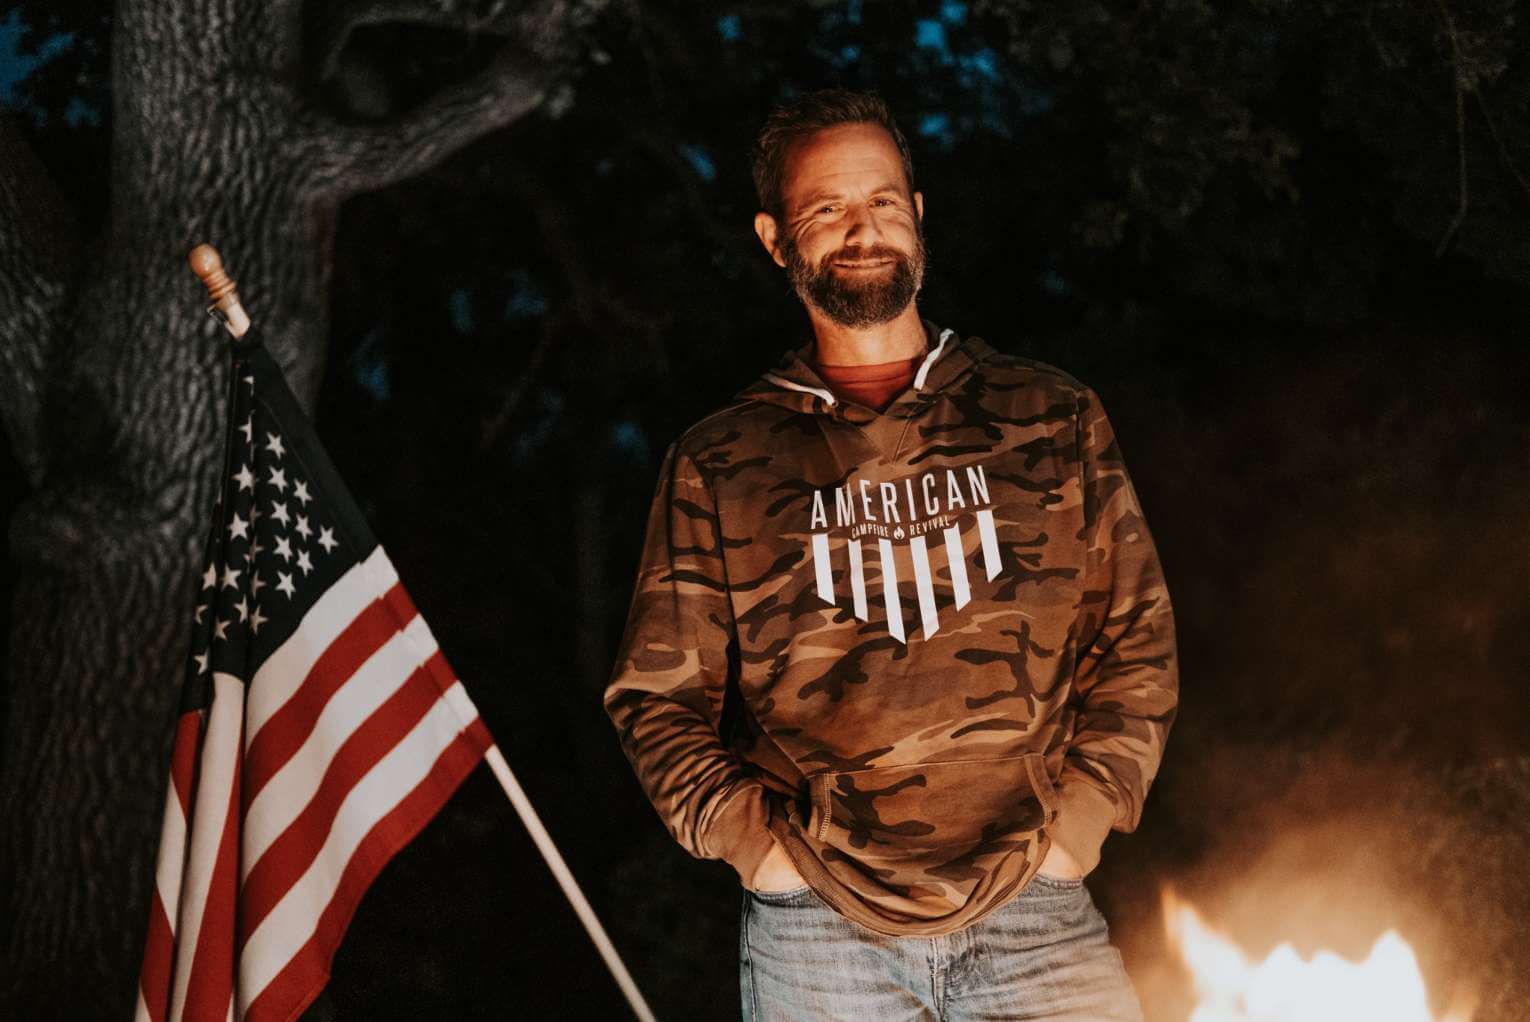 Morning Rundown: Kirk Cameron ‘Didn’t Feel Safe’ in California, Moved Family to God-Fearing State of Tennessee